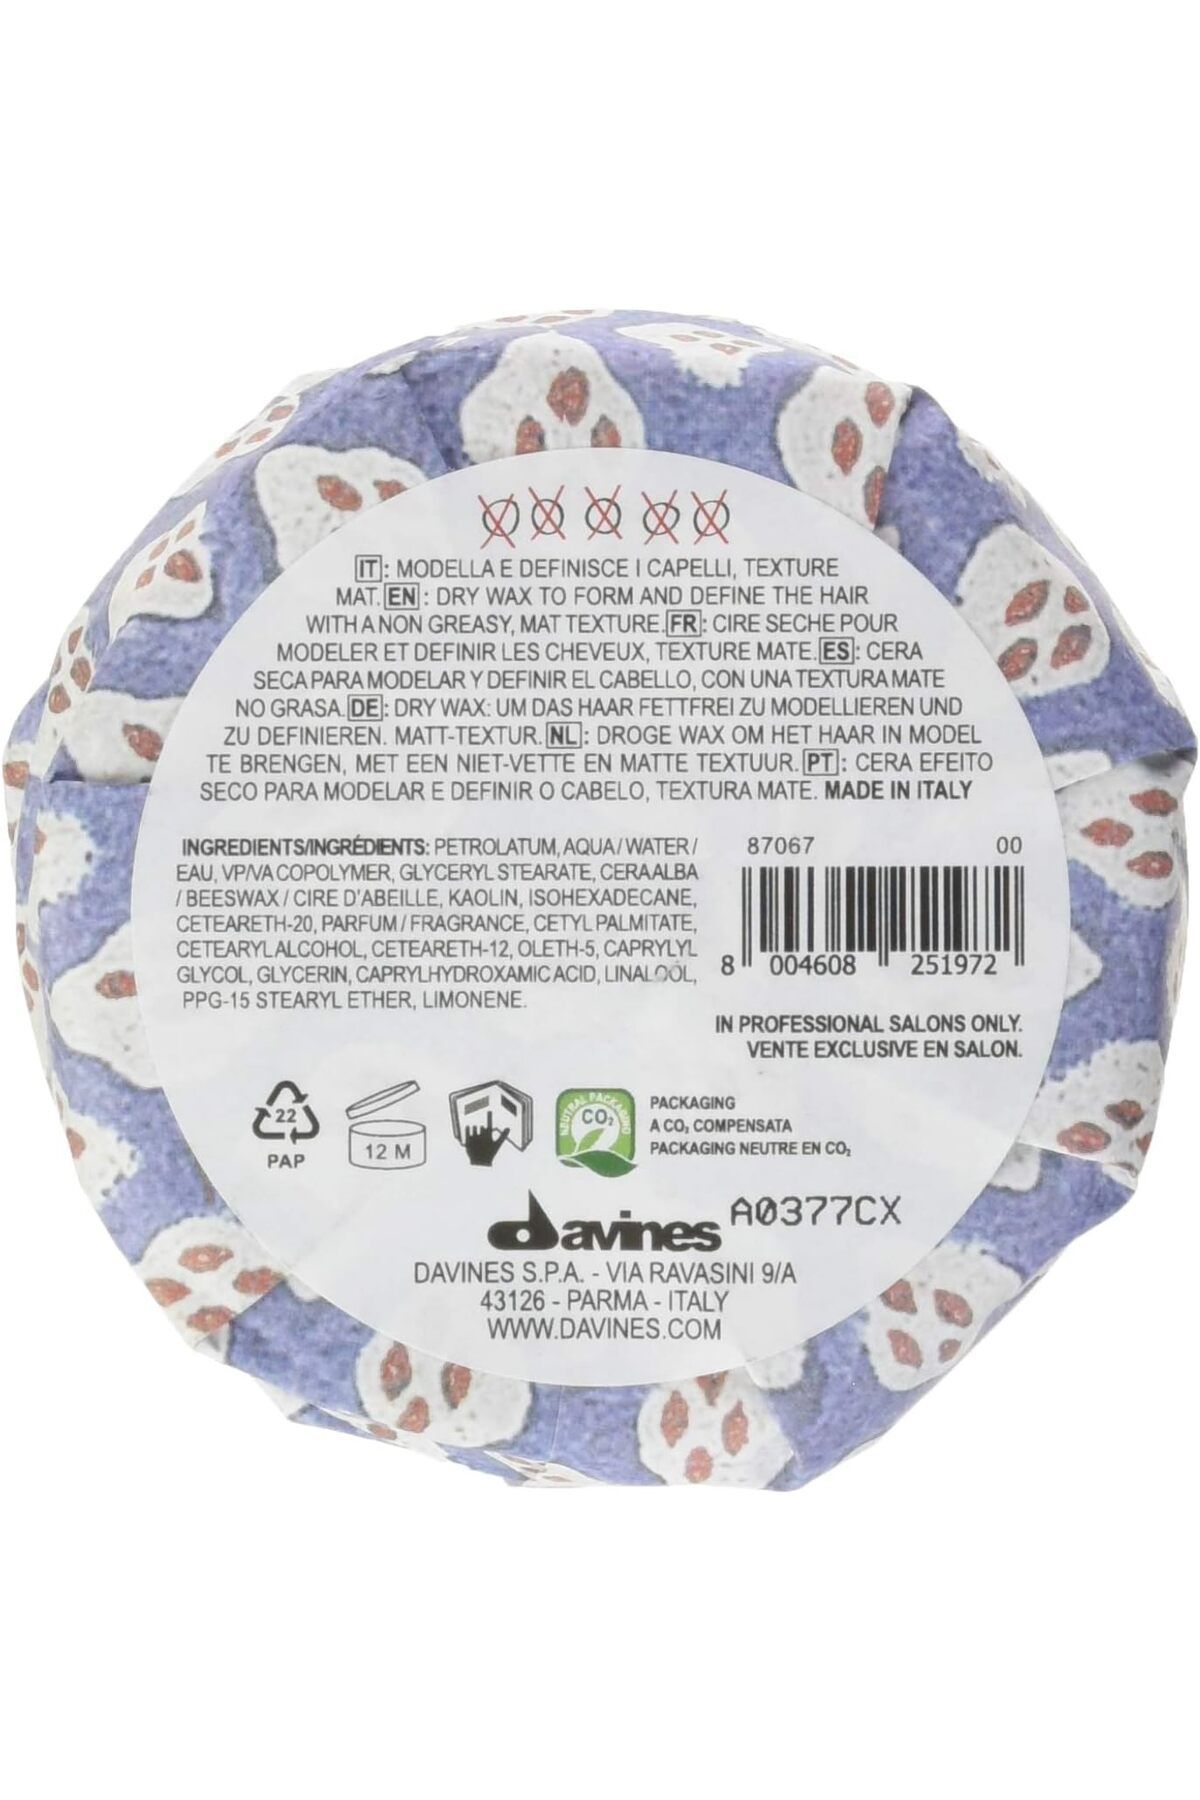 Davines More Inside This is a Strong Dry Wax ECBEAUTY1